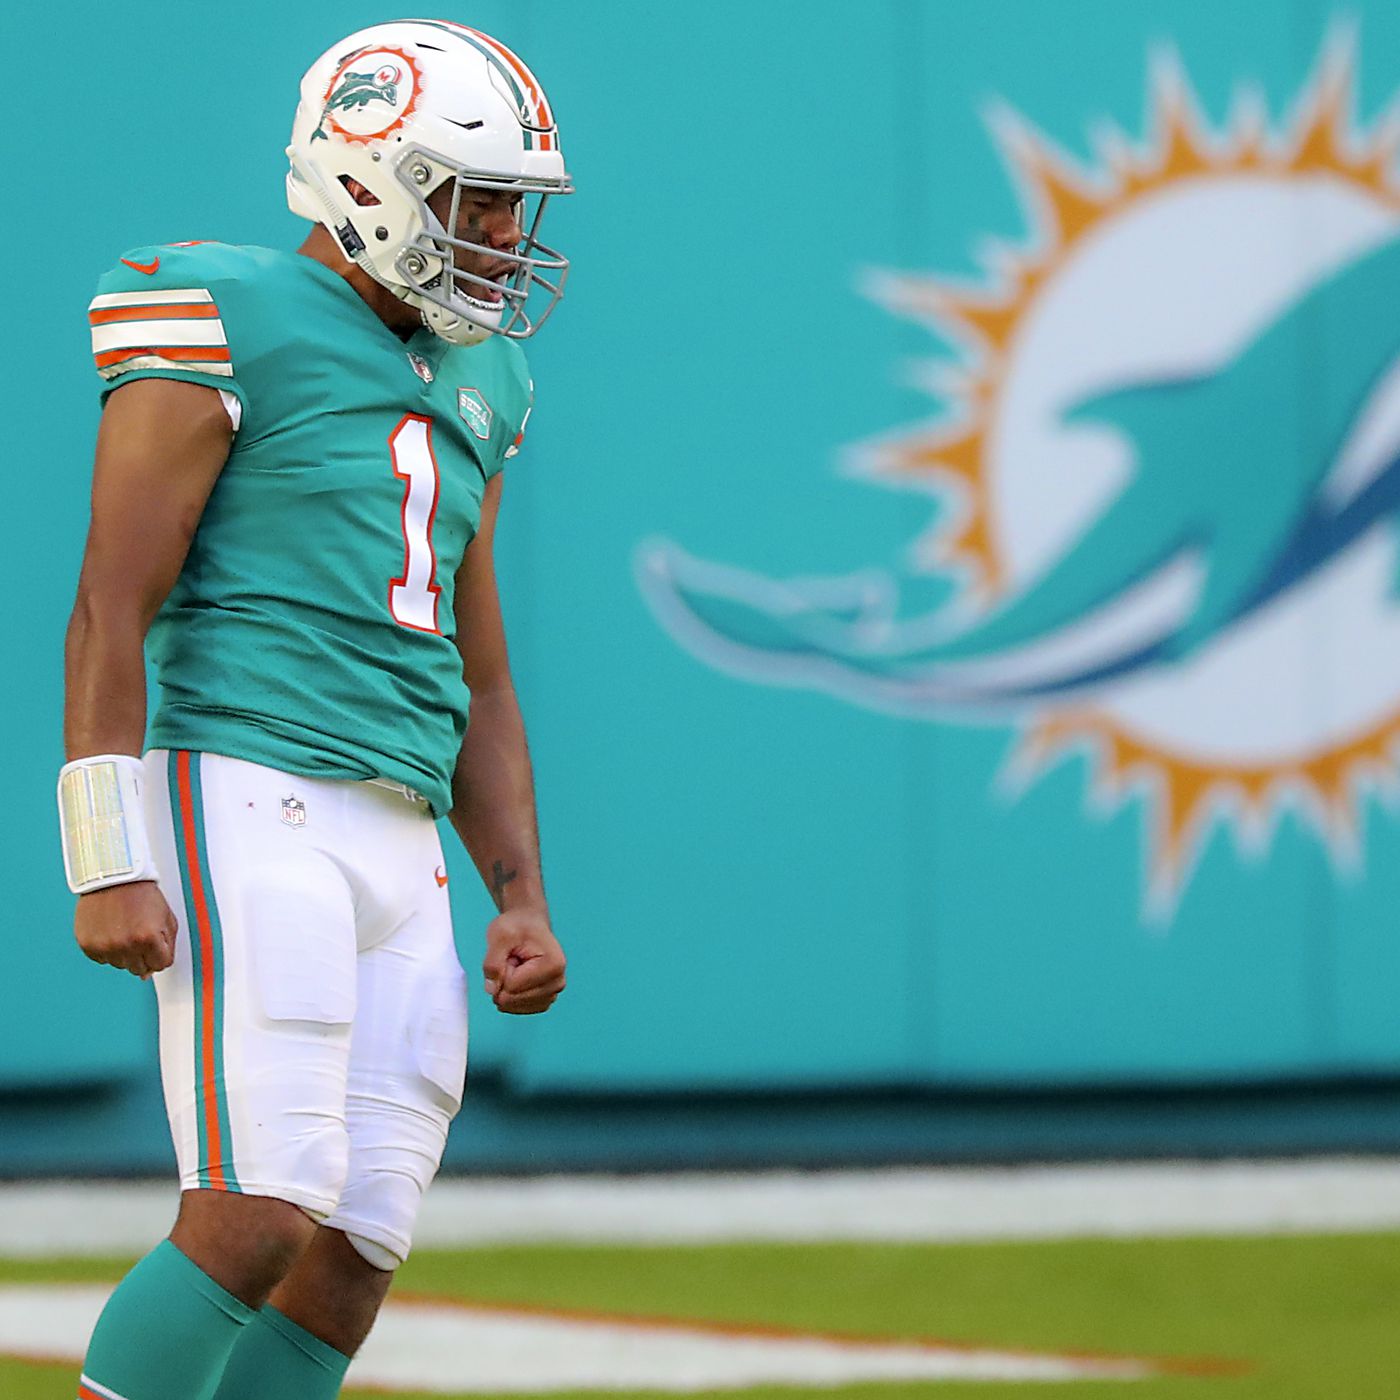 Dolphins 2021 schedule: Opponents finalized pending potential 17th